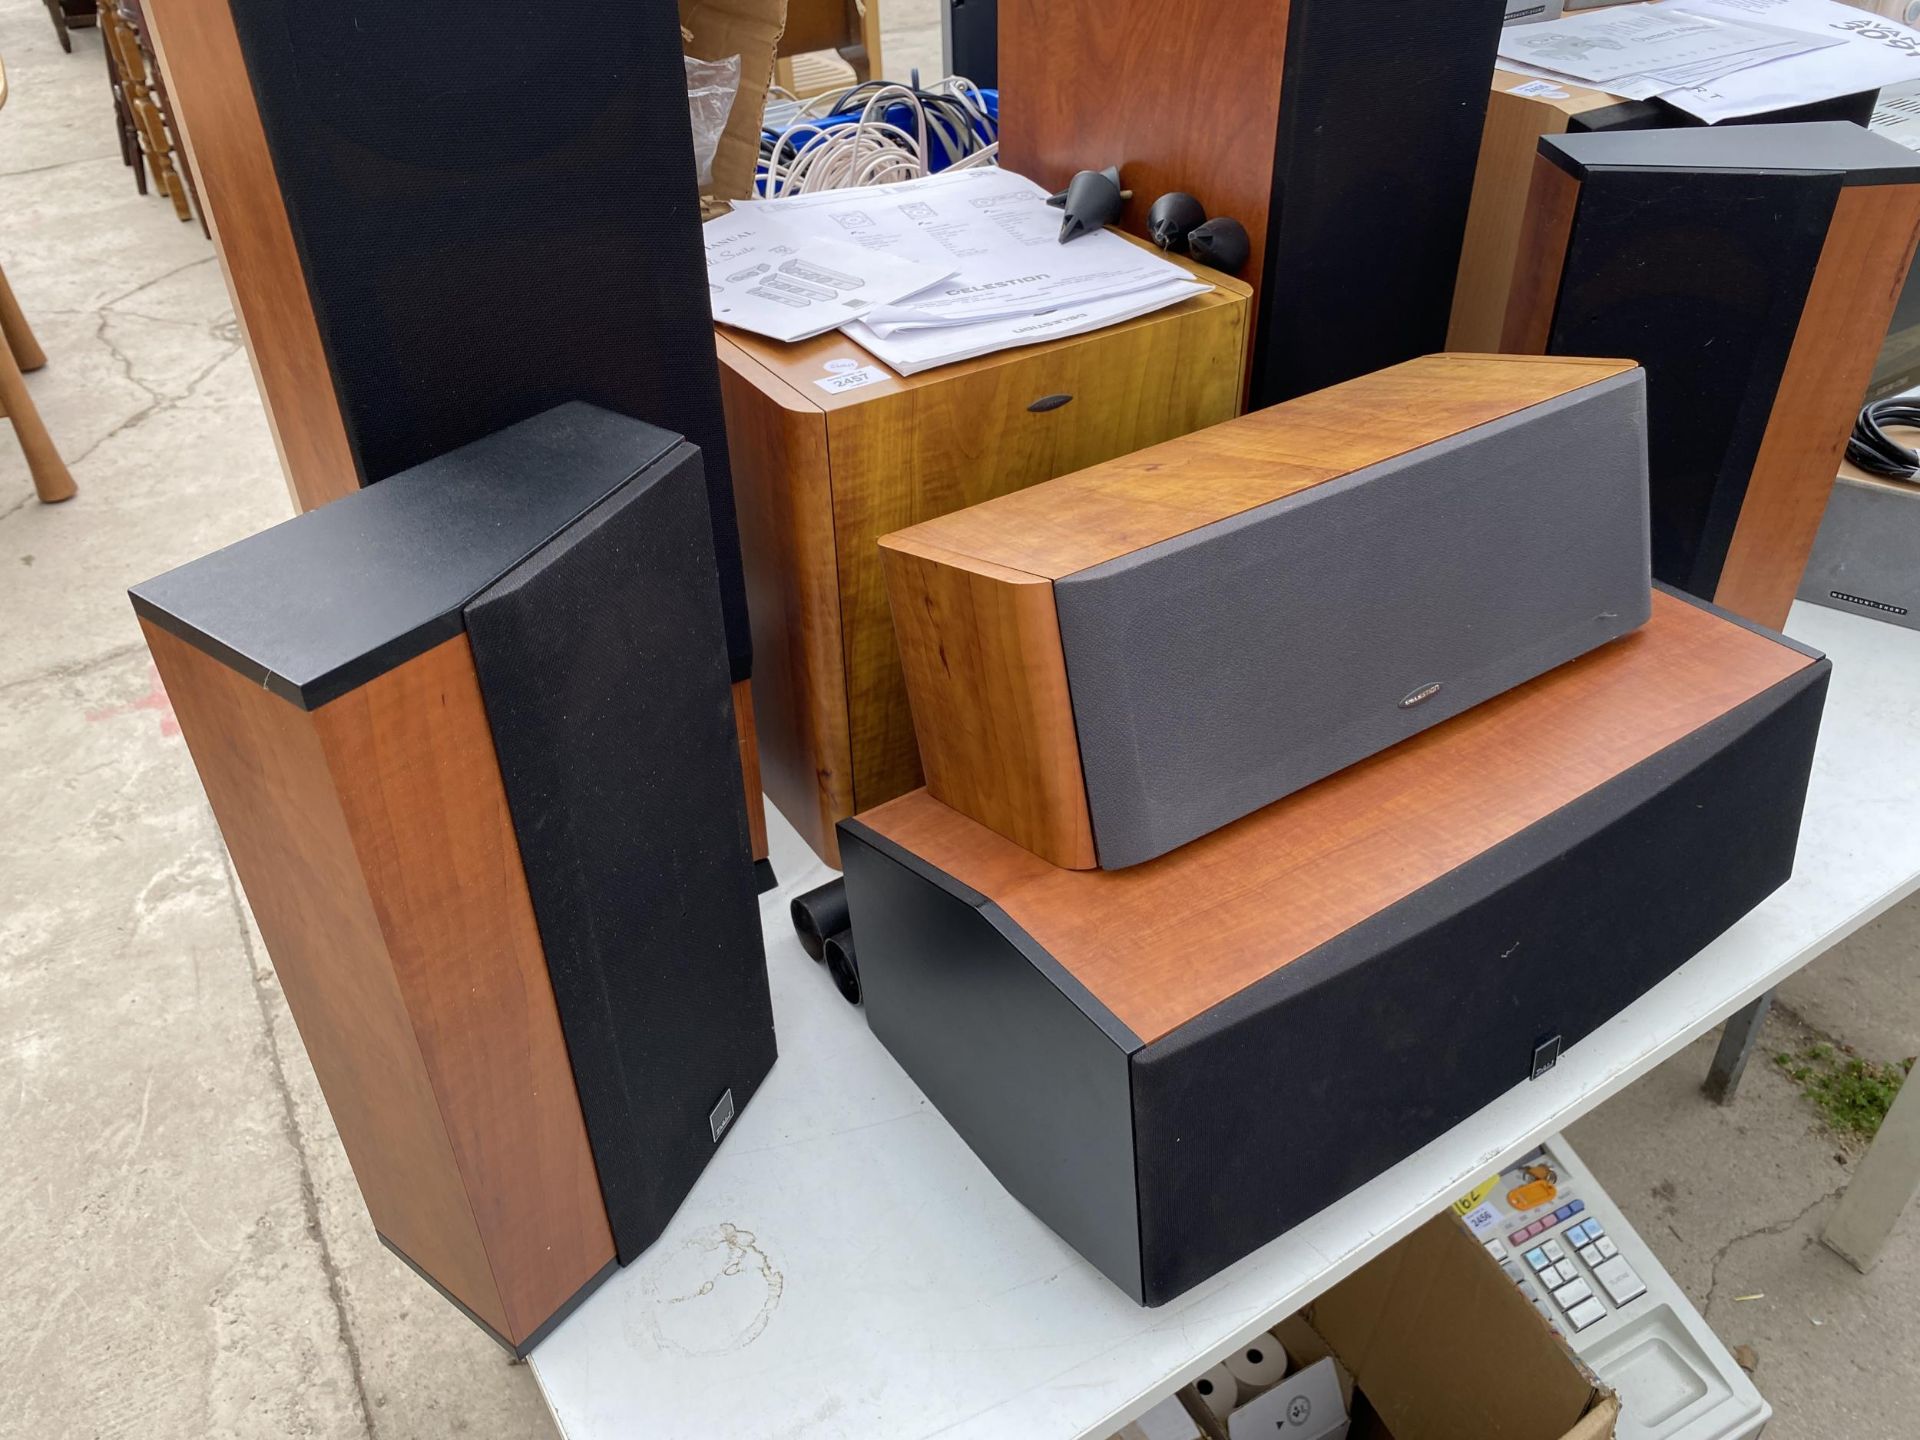 A SET OF DALI SUITE 2.5 SPEAKERS FOR SURROUND SOUND EXPIERENCE - Image 2 of 5